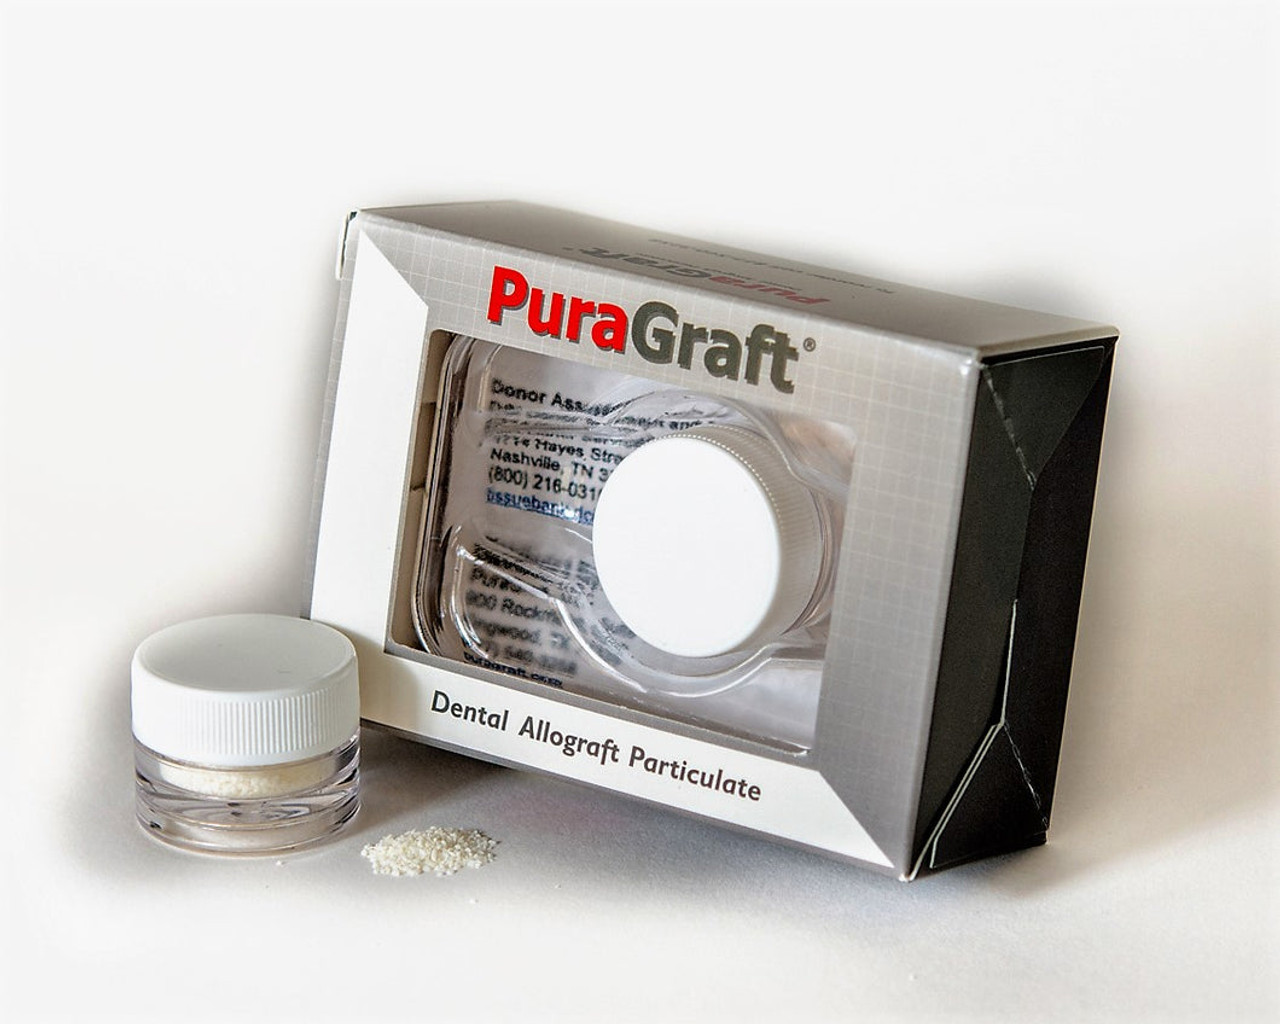 Puragraft Mineralized Cancellous Allograft Particulate 1000-2000 micros 1cc Professional Use Only